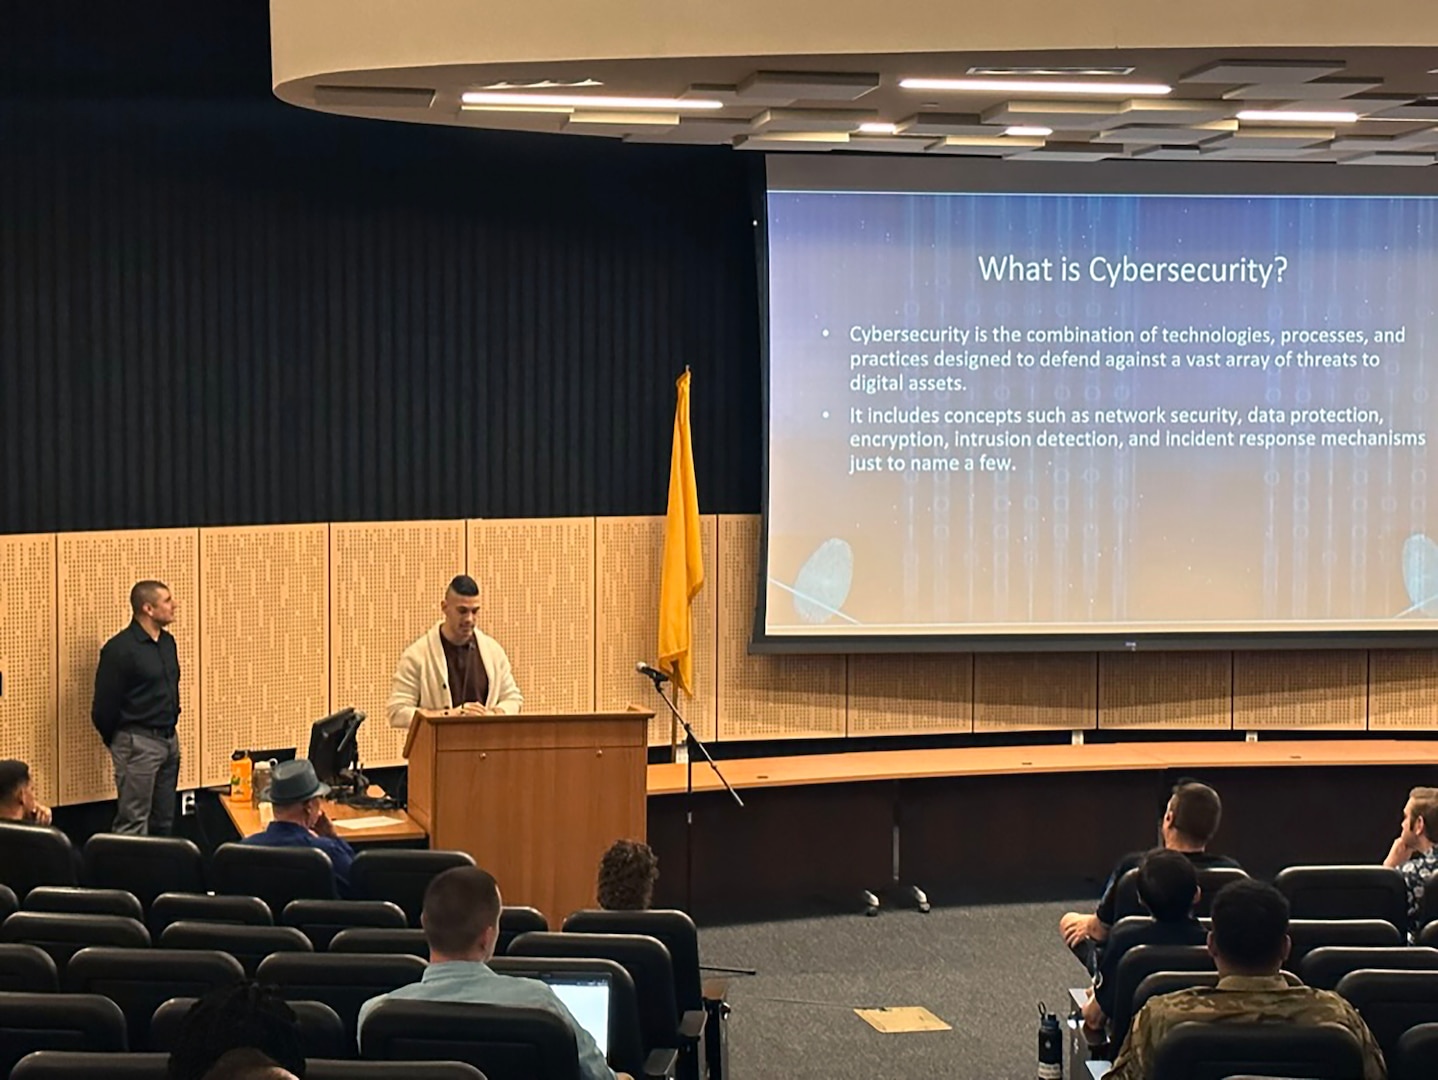 Instructors provide an introductory seminar to cybersecurity at the Central New Mexico Community College in Albuquerque, New Mexico on July 10, 2023. Students received a questionnaire in order to gauge their existing knowledge and skills. (Courtesy photo)